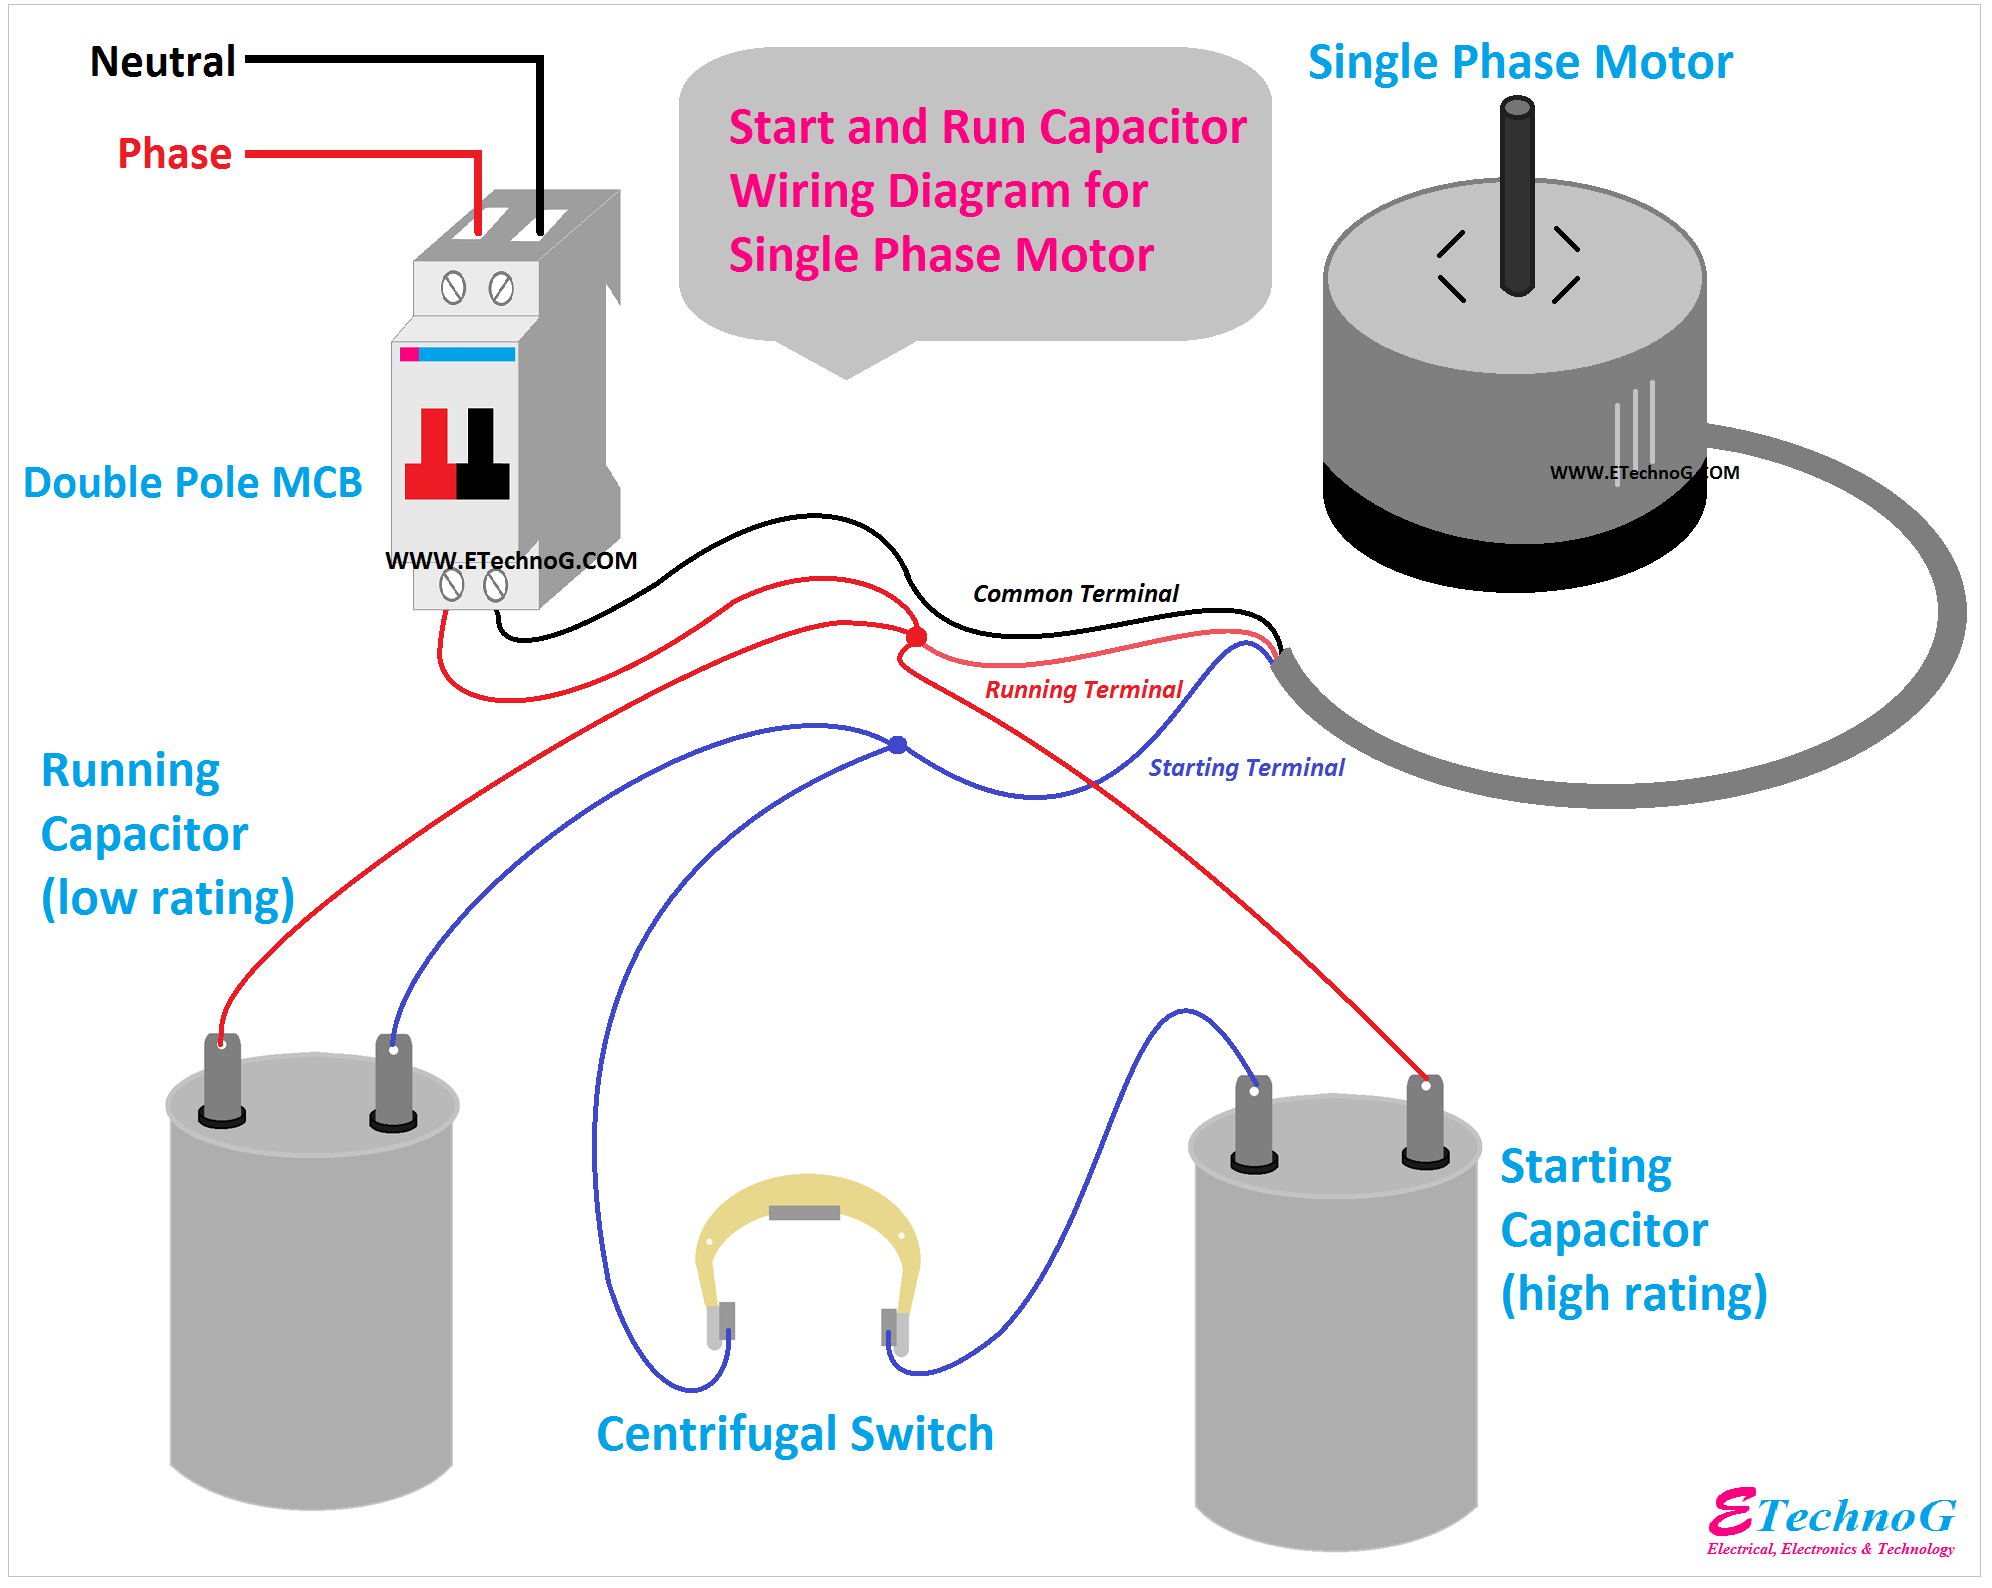 Start and Run Capacitor Wiring Diagram for Single Phase Motor, double capacitor connection